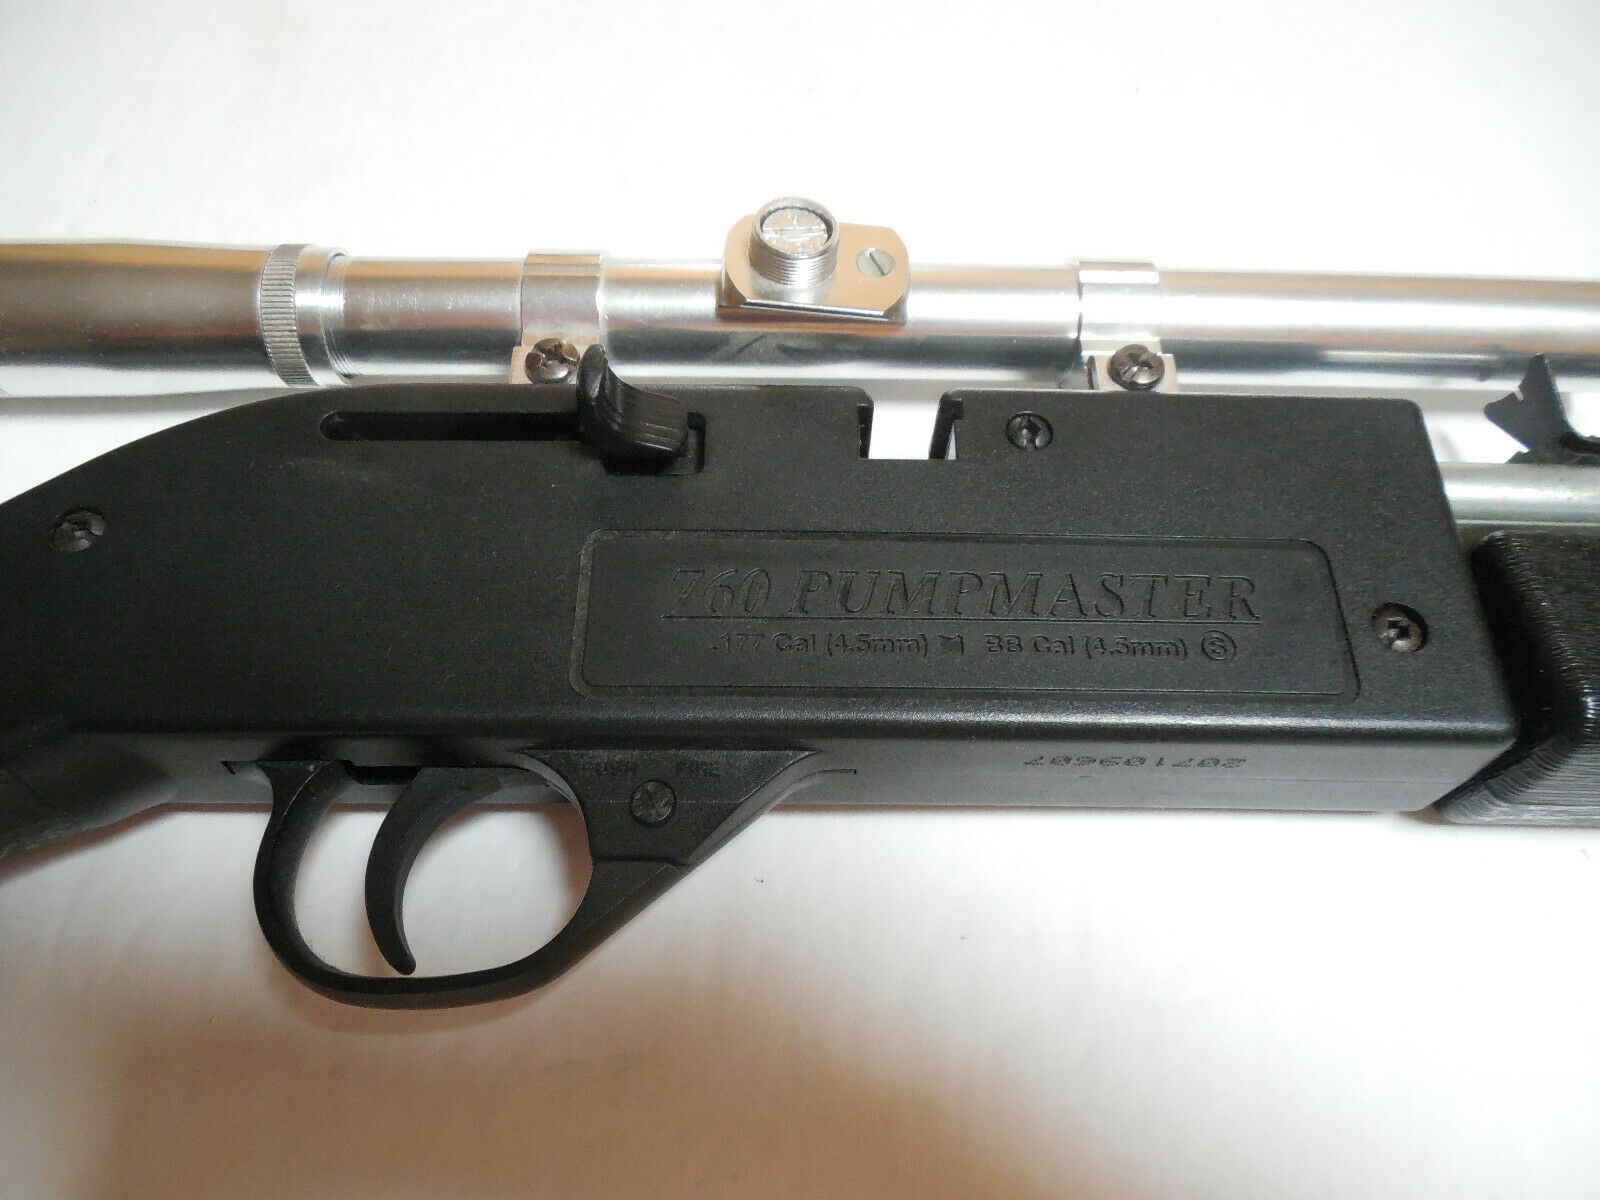 CROSMAN PUMPMASTER PUMP BB PELLET AIR RIFLE With Scope And Co BB Pistol